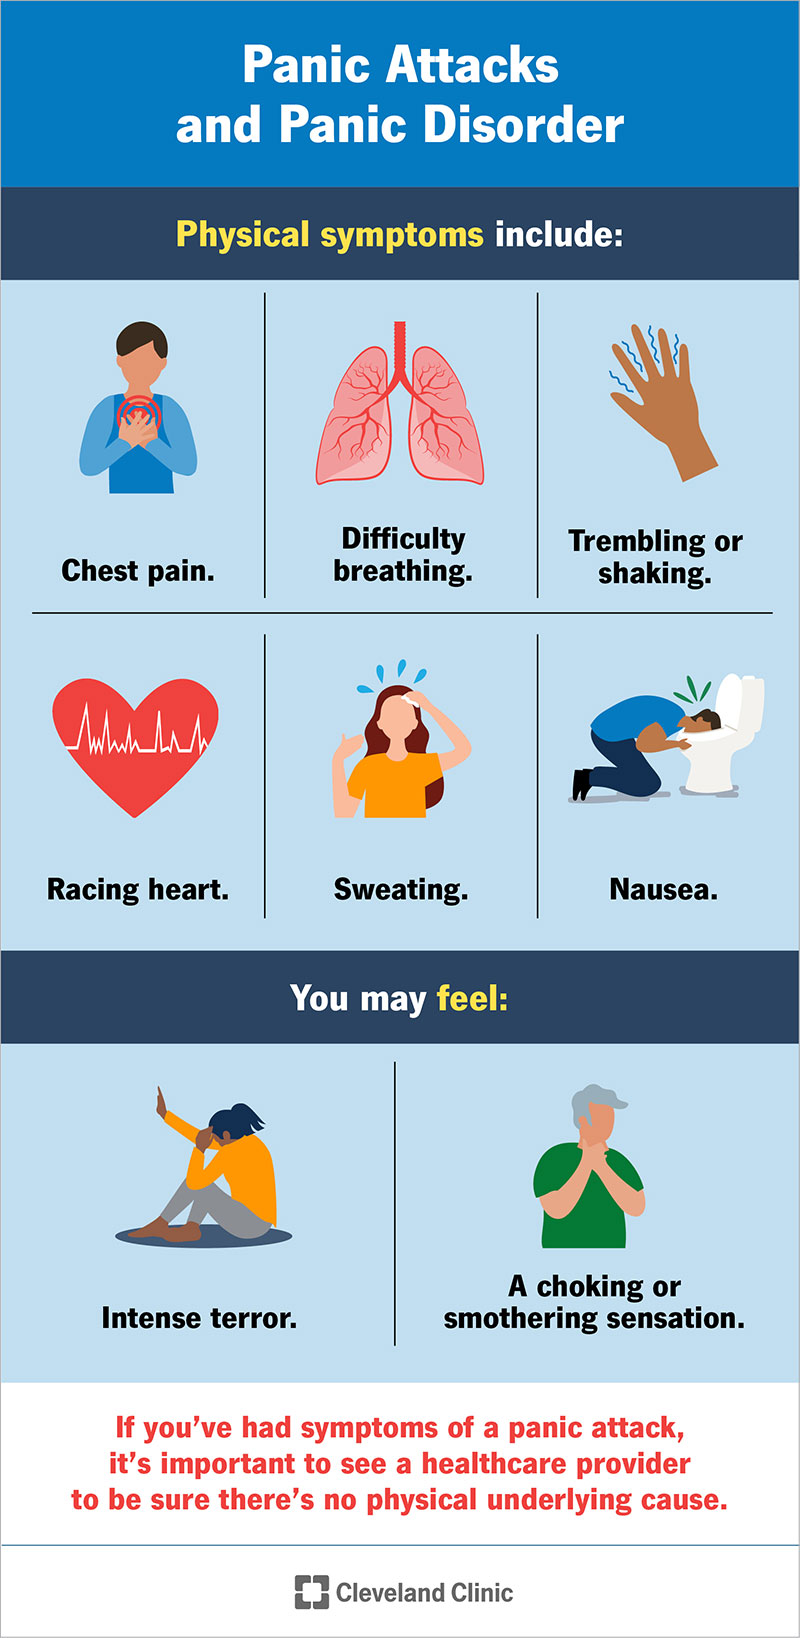 Symptoms of panic attacks include difficulty breathing, racing heart and trembling, feeling intense terror and a choking sensation.